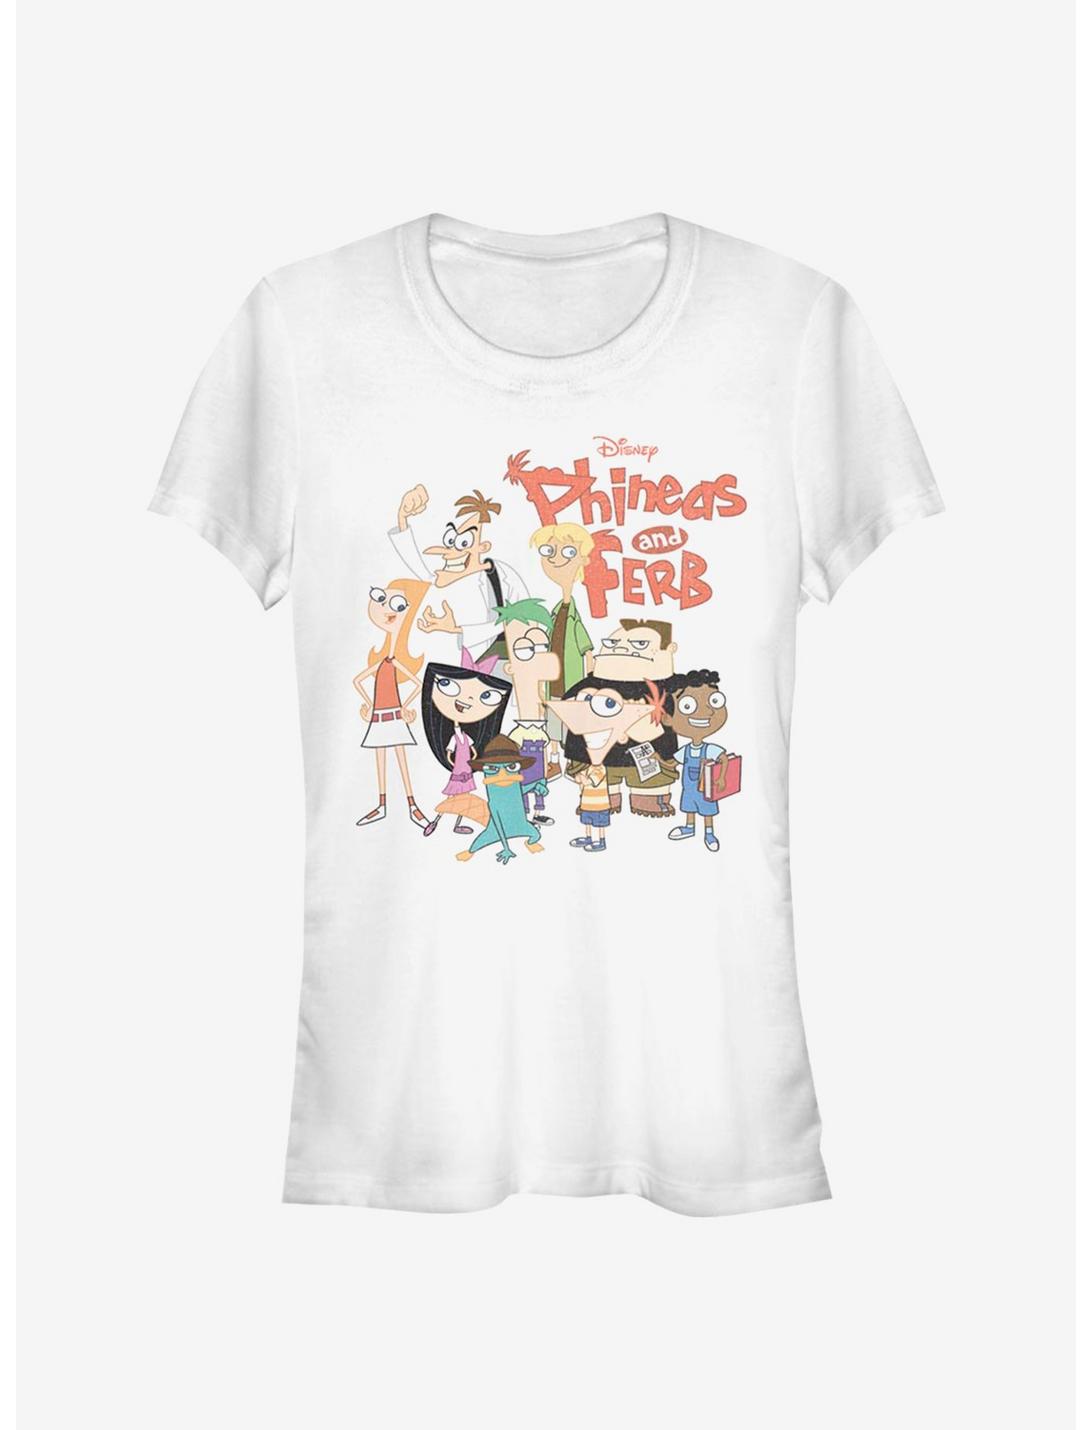 Disney Phineas And Ferb The Group Girls T-Shirt, WHITE, hi-res